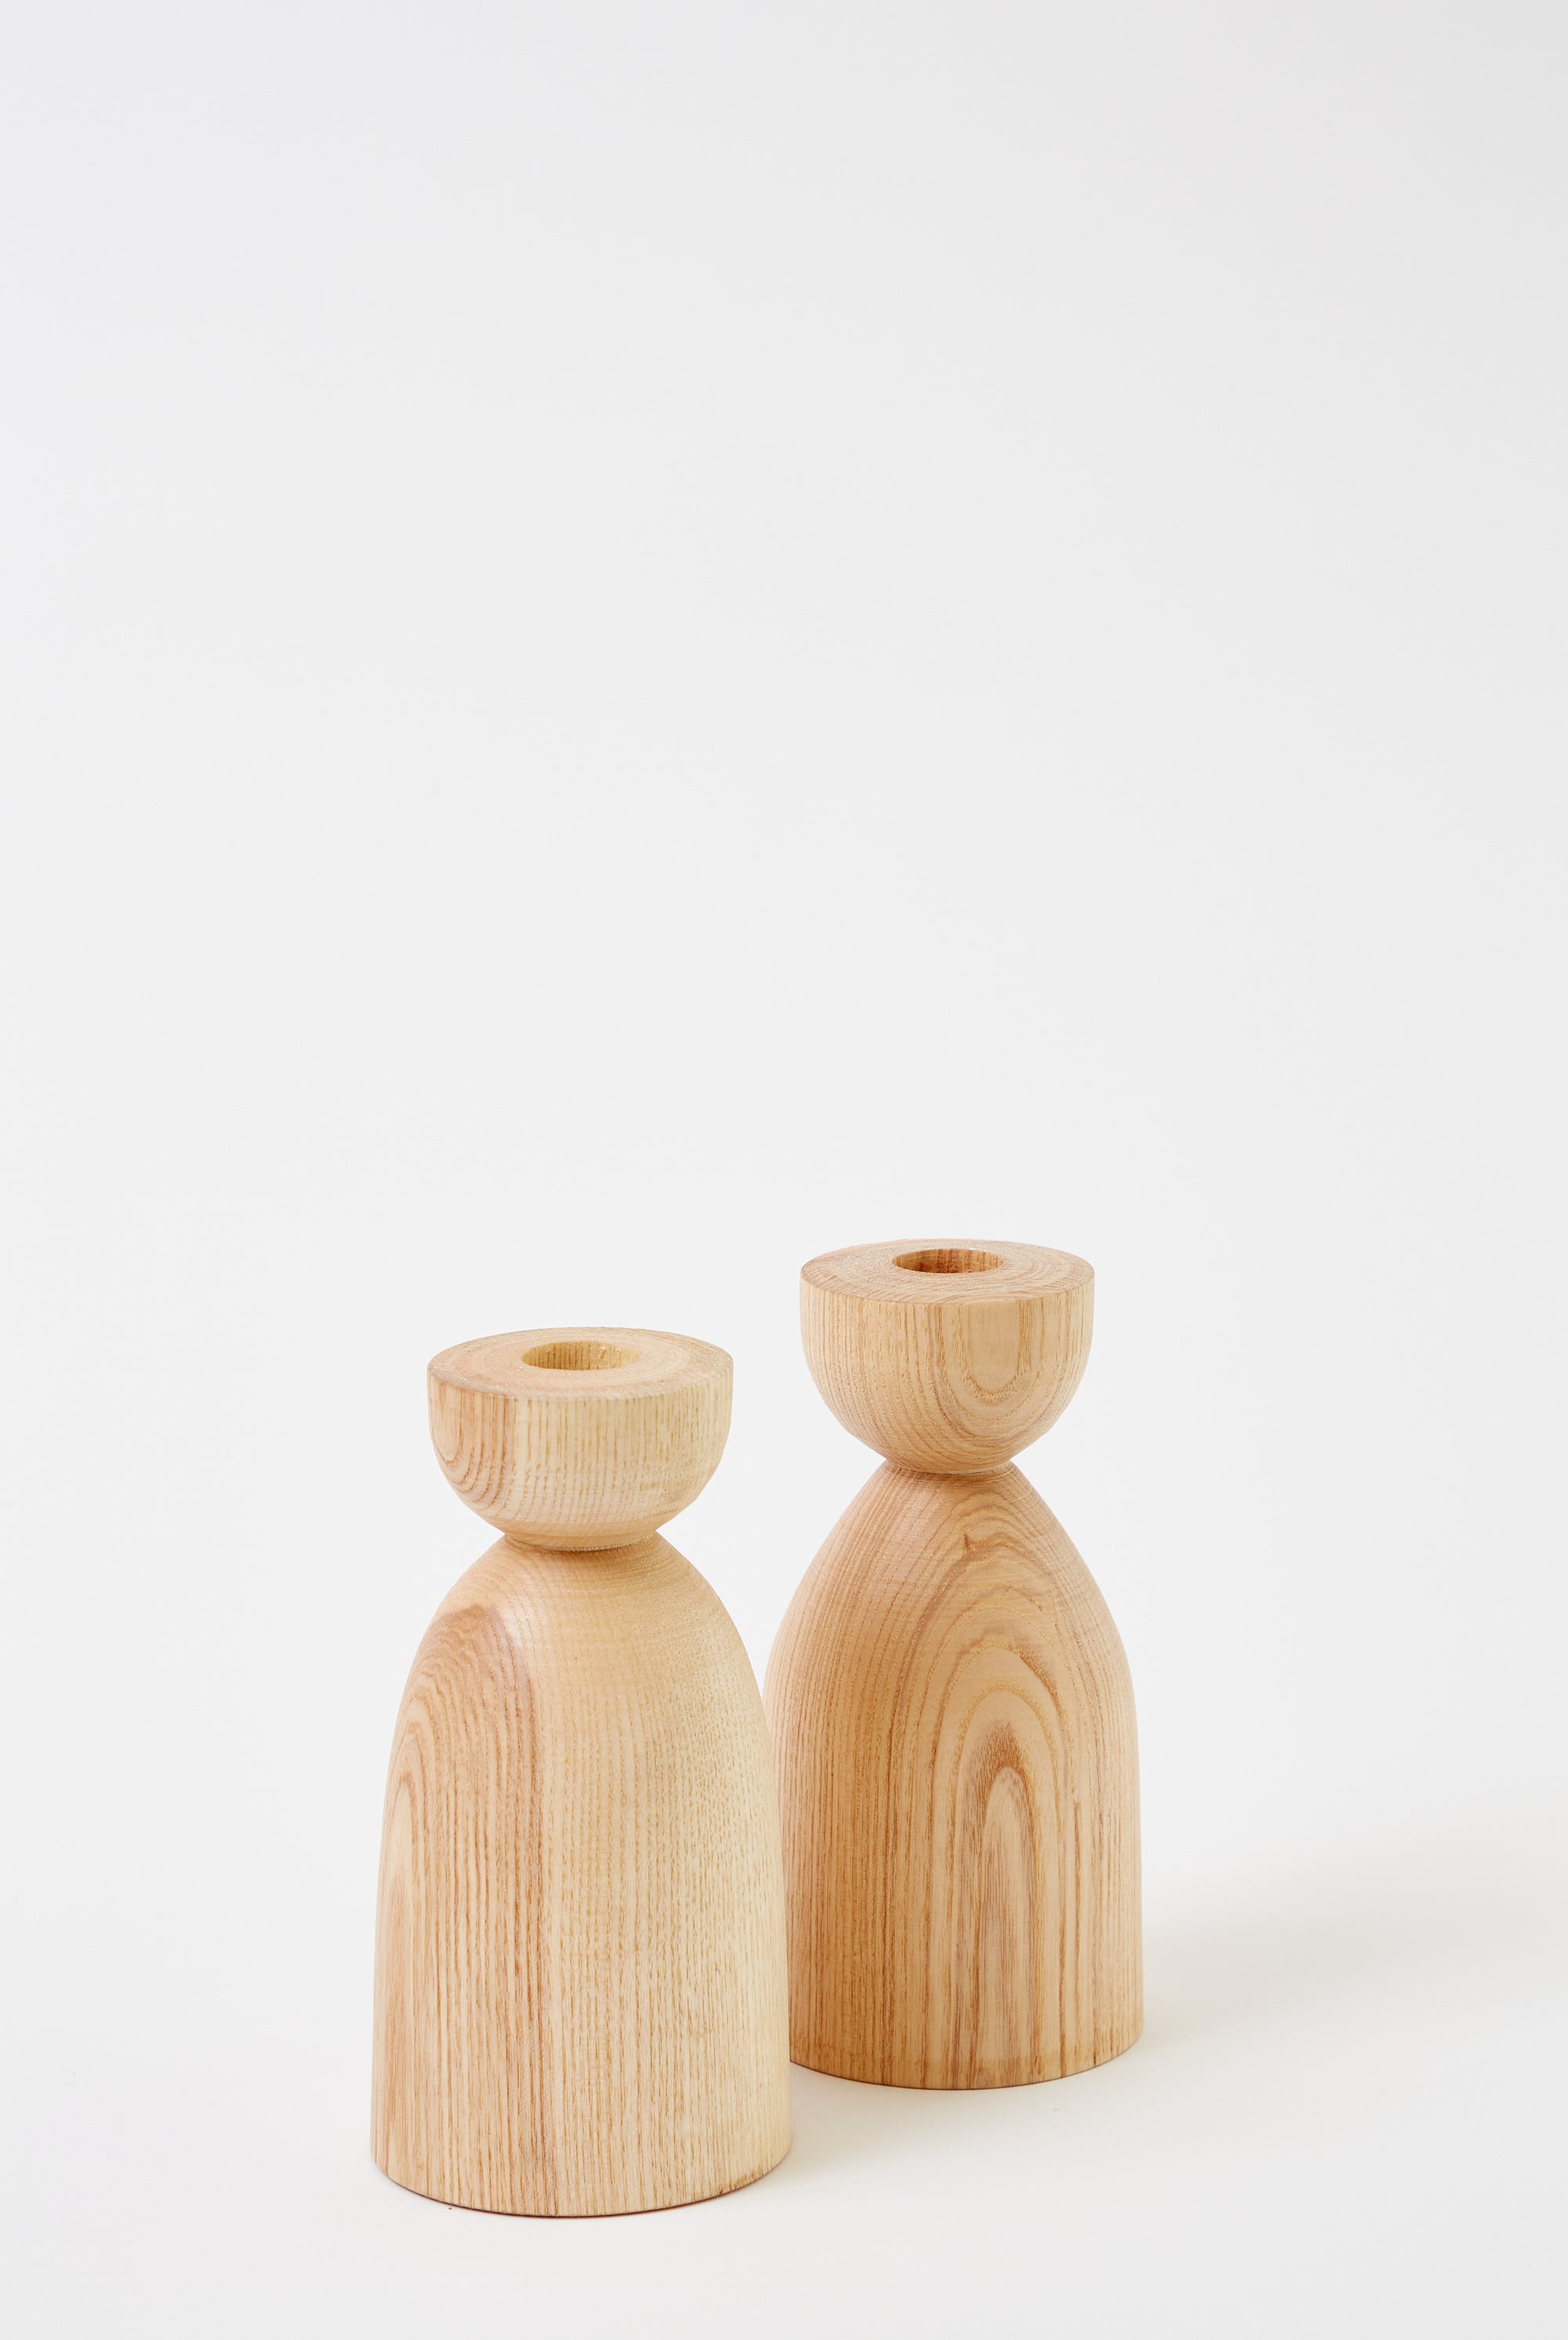 Alex Walshaw Set of Tall Candlesticks in Natural